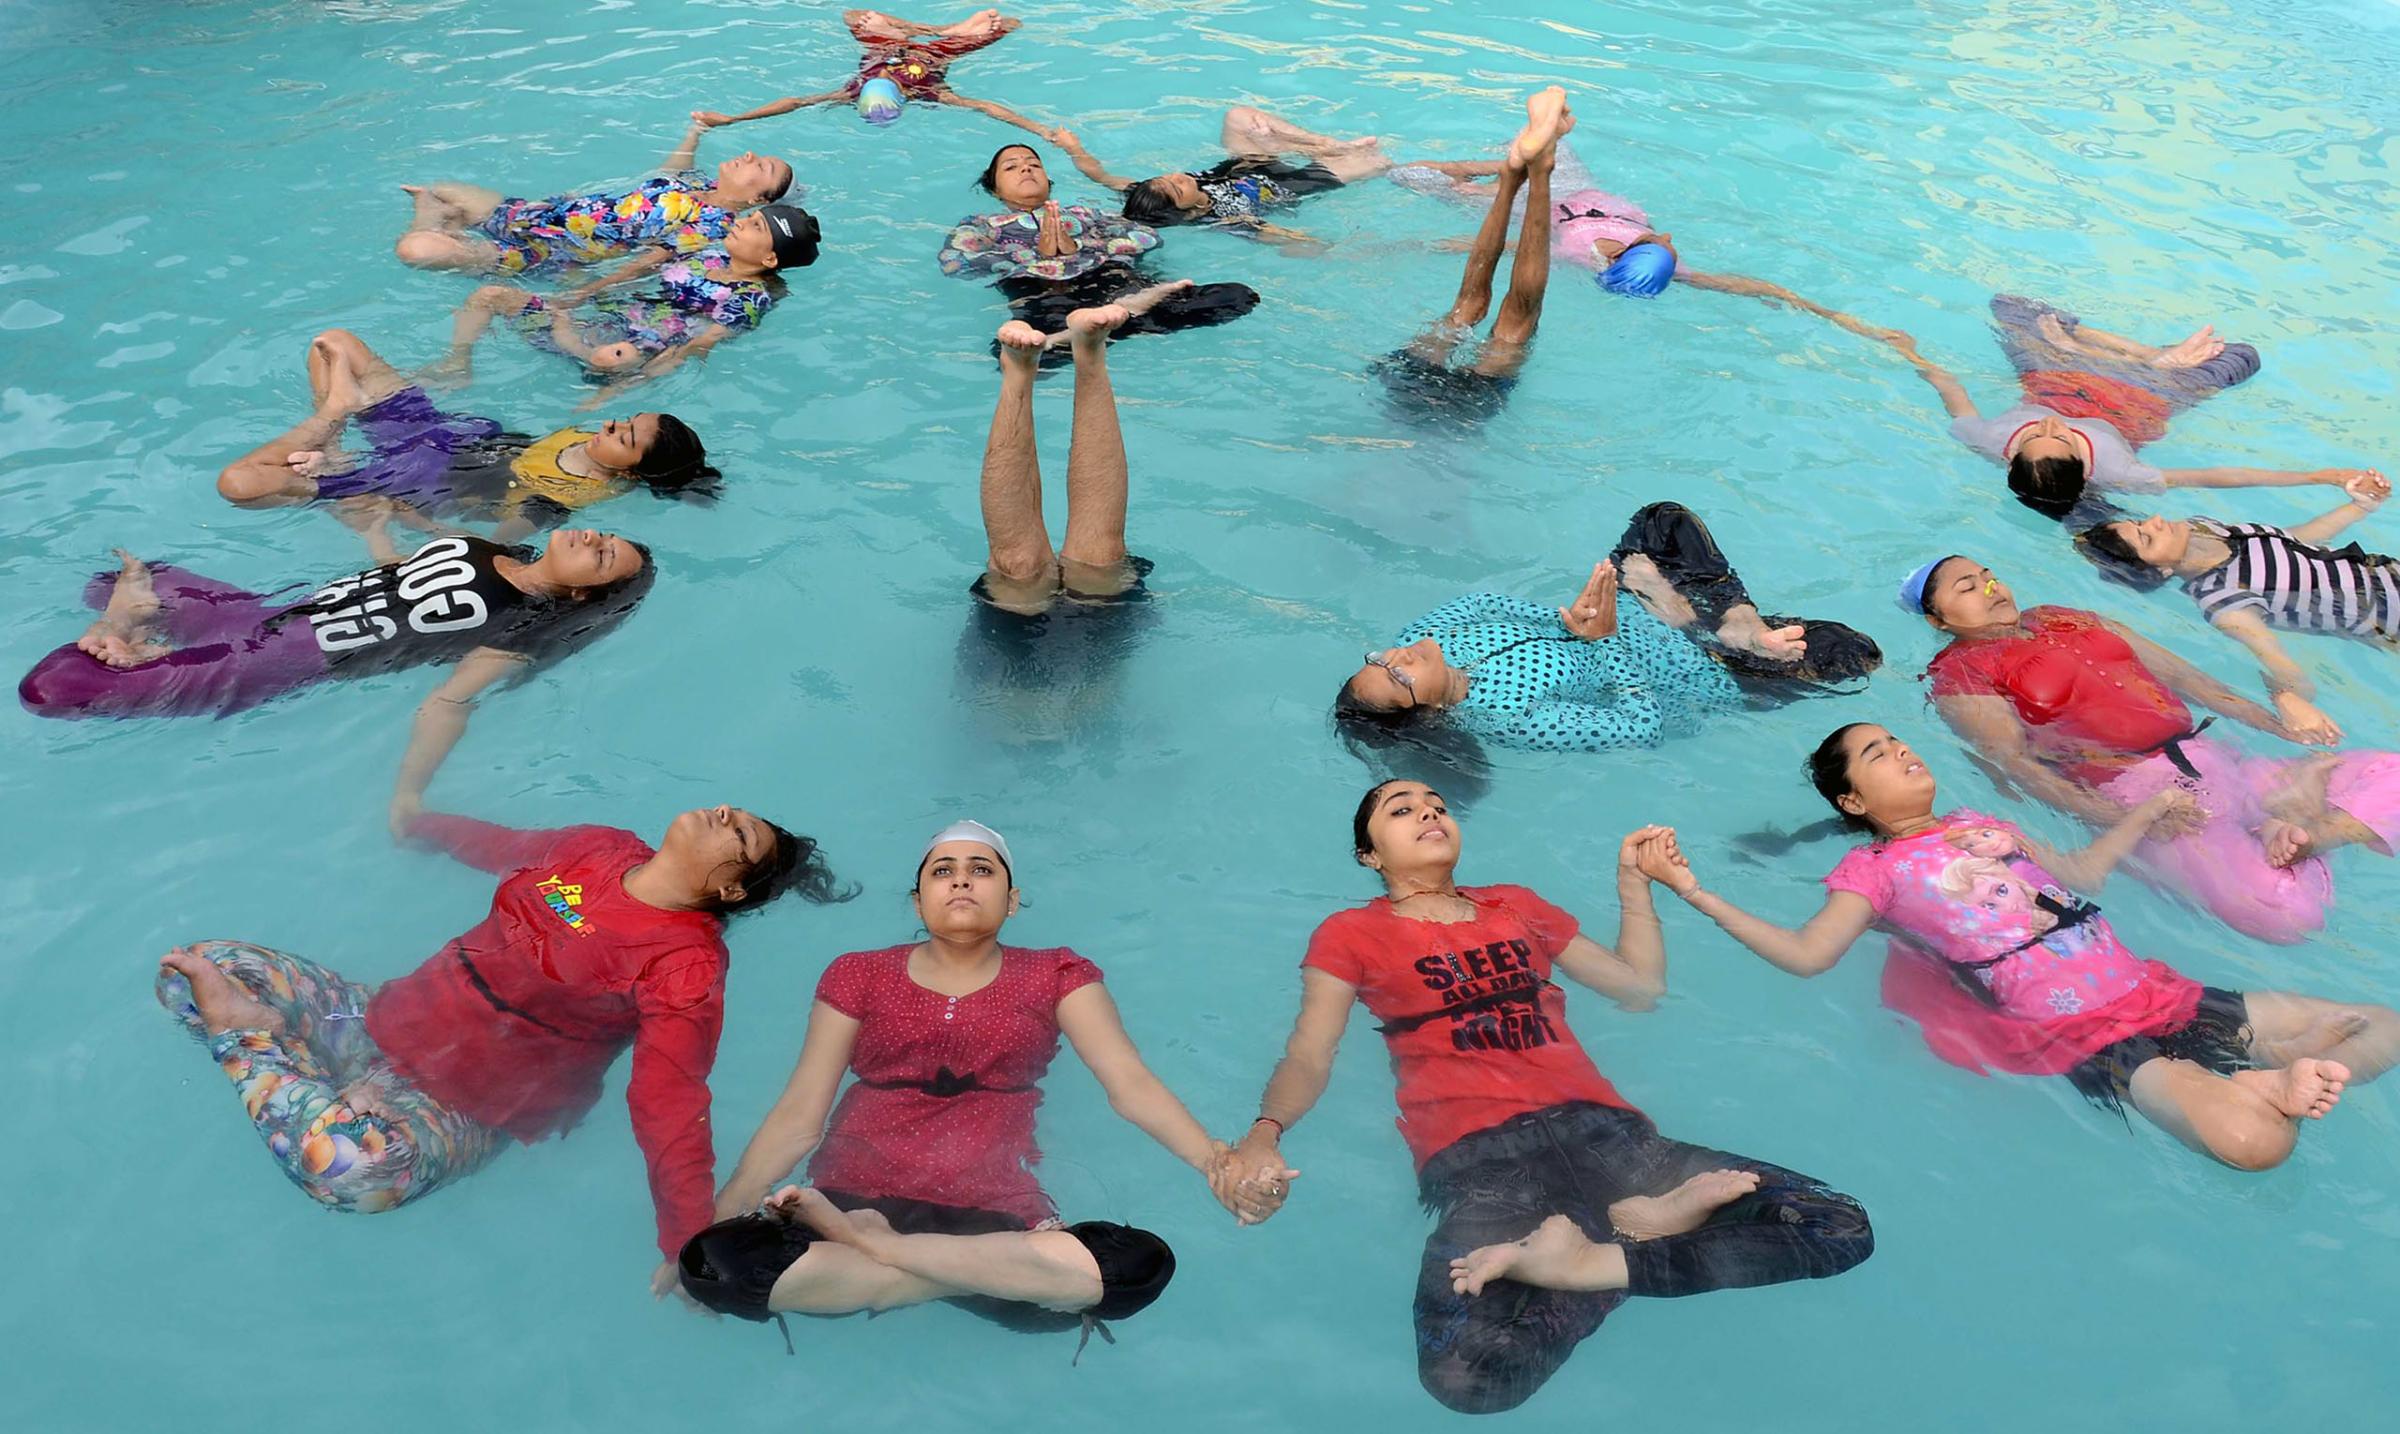 Indian yoga practitioners take part in a yoga session in a swimming pool on International Yoga Day in Jodhpur, India, on June 21, 2016.